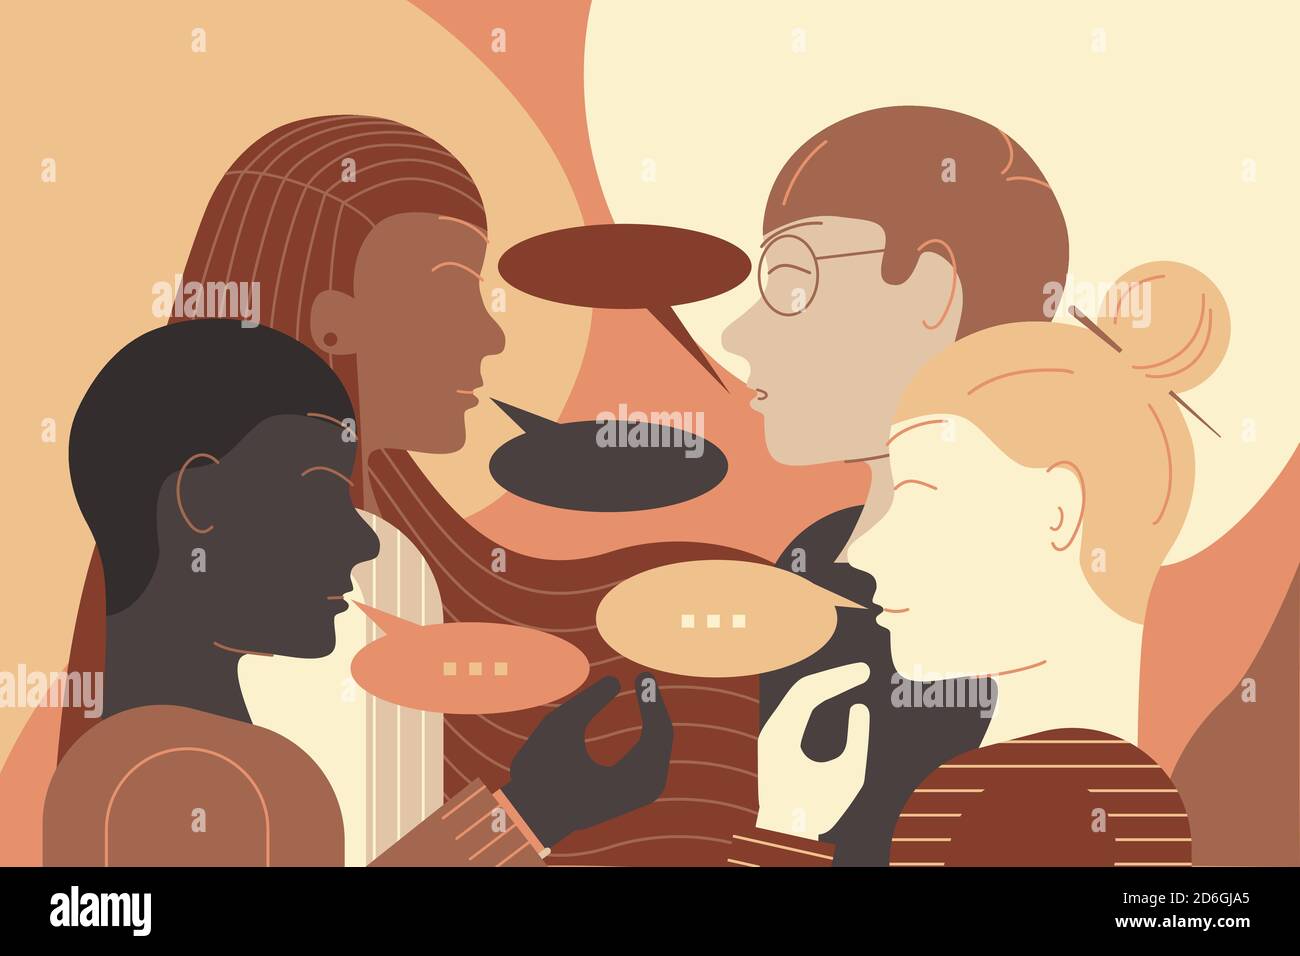 Group of young people of different ethnicies having a conversation face to face. Antiracism illustrations. Stock Vector